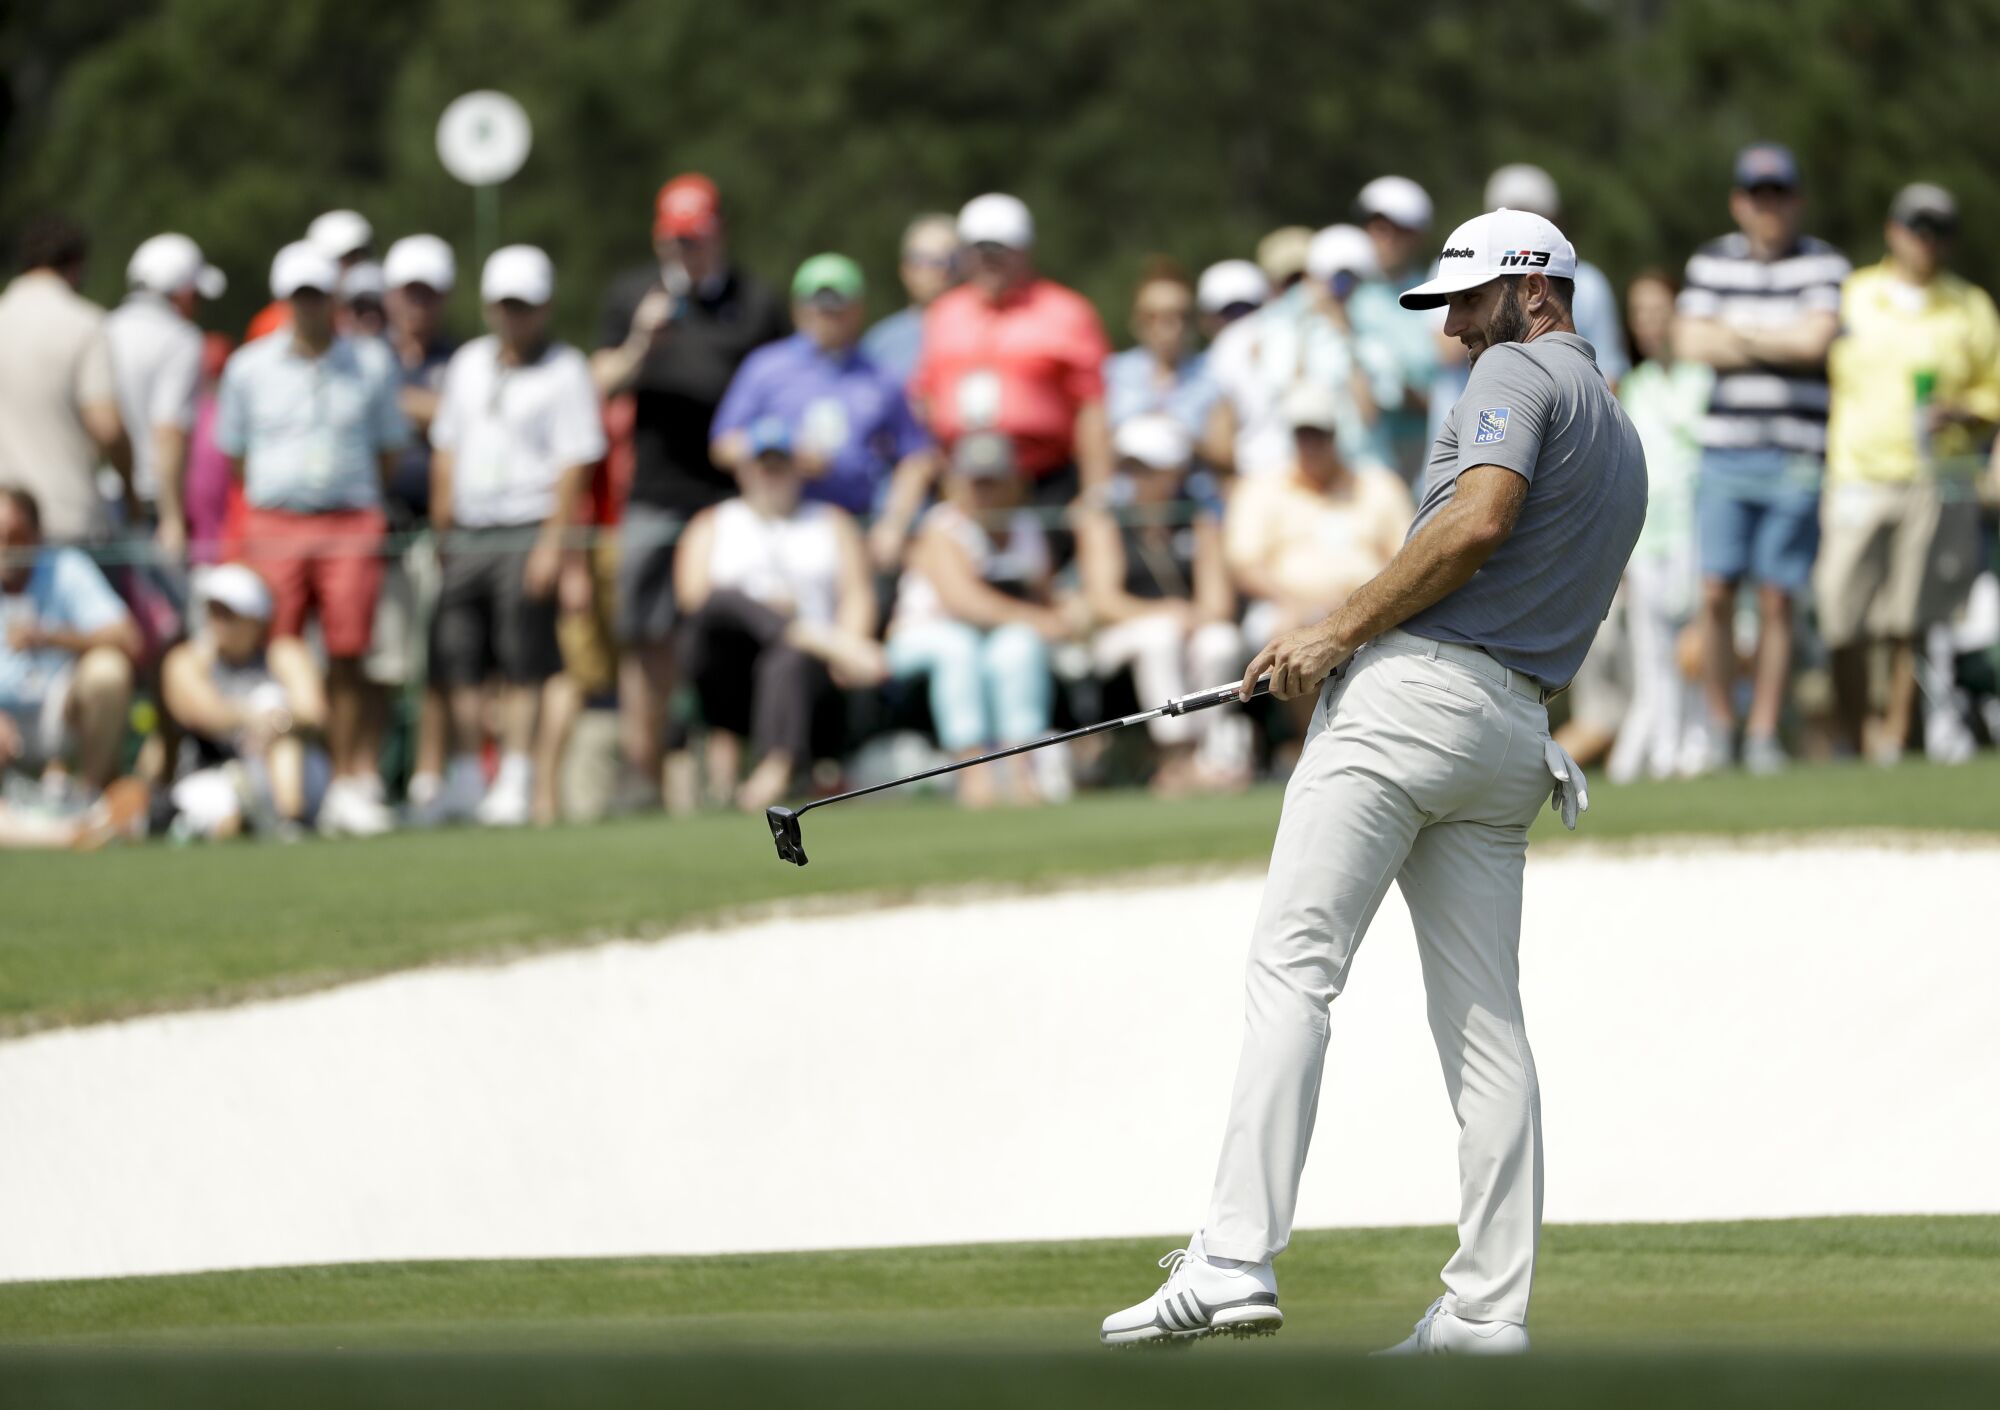 Dustin Johnson watches his putt on the 17th hole at Augusta National Golf Club.